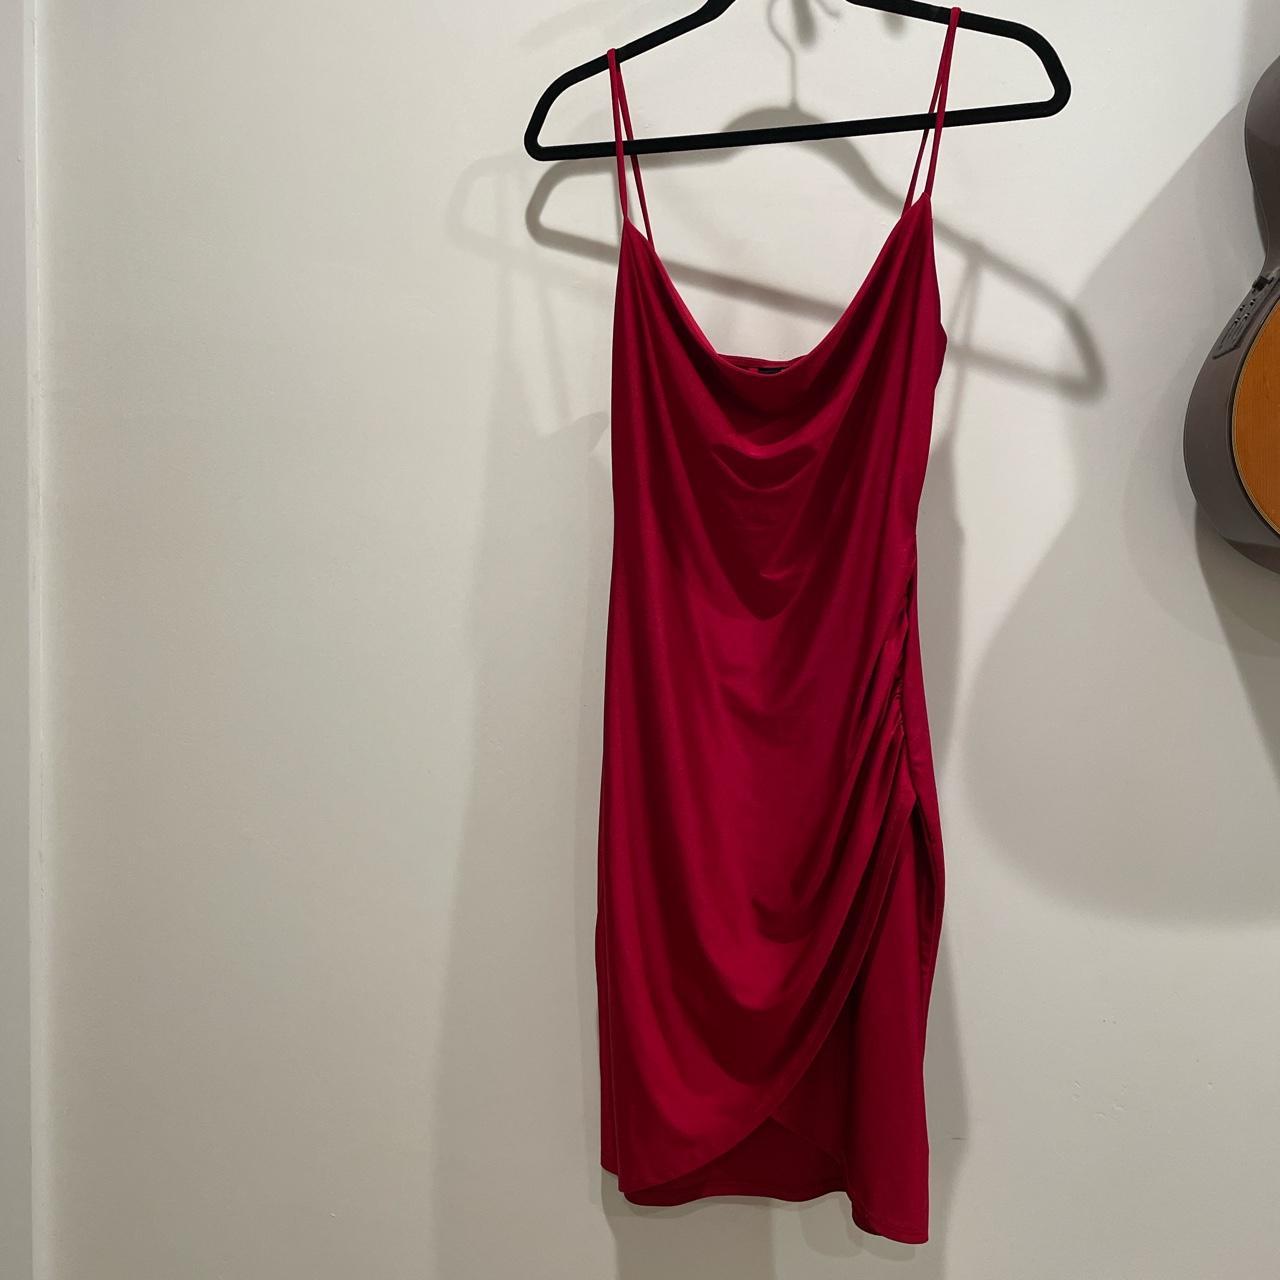 Windsor red dress -stretchy fabric, worn once! - Depop